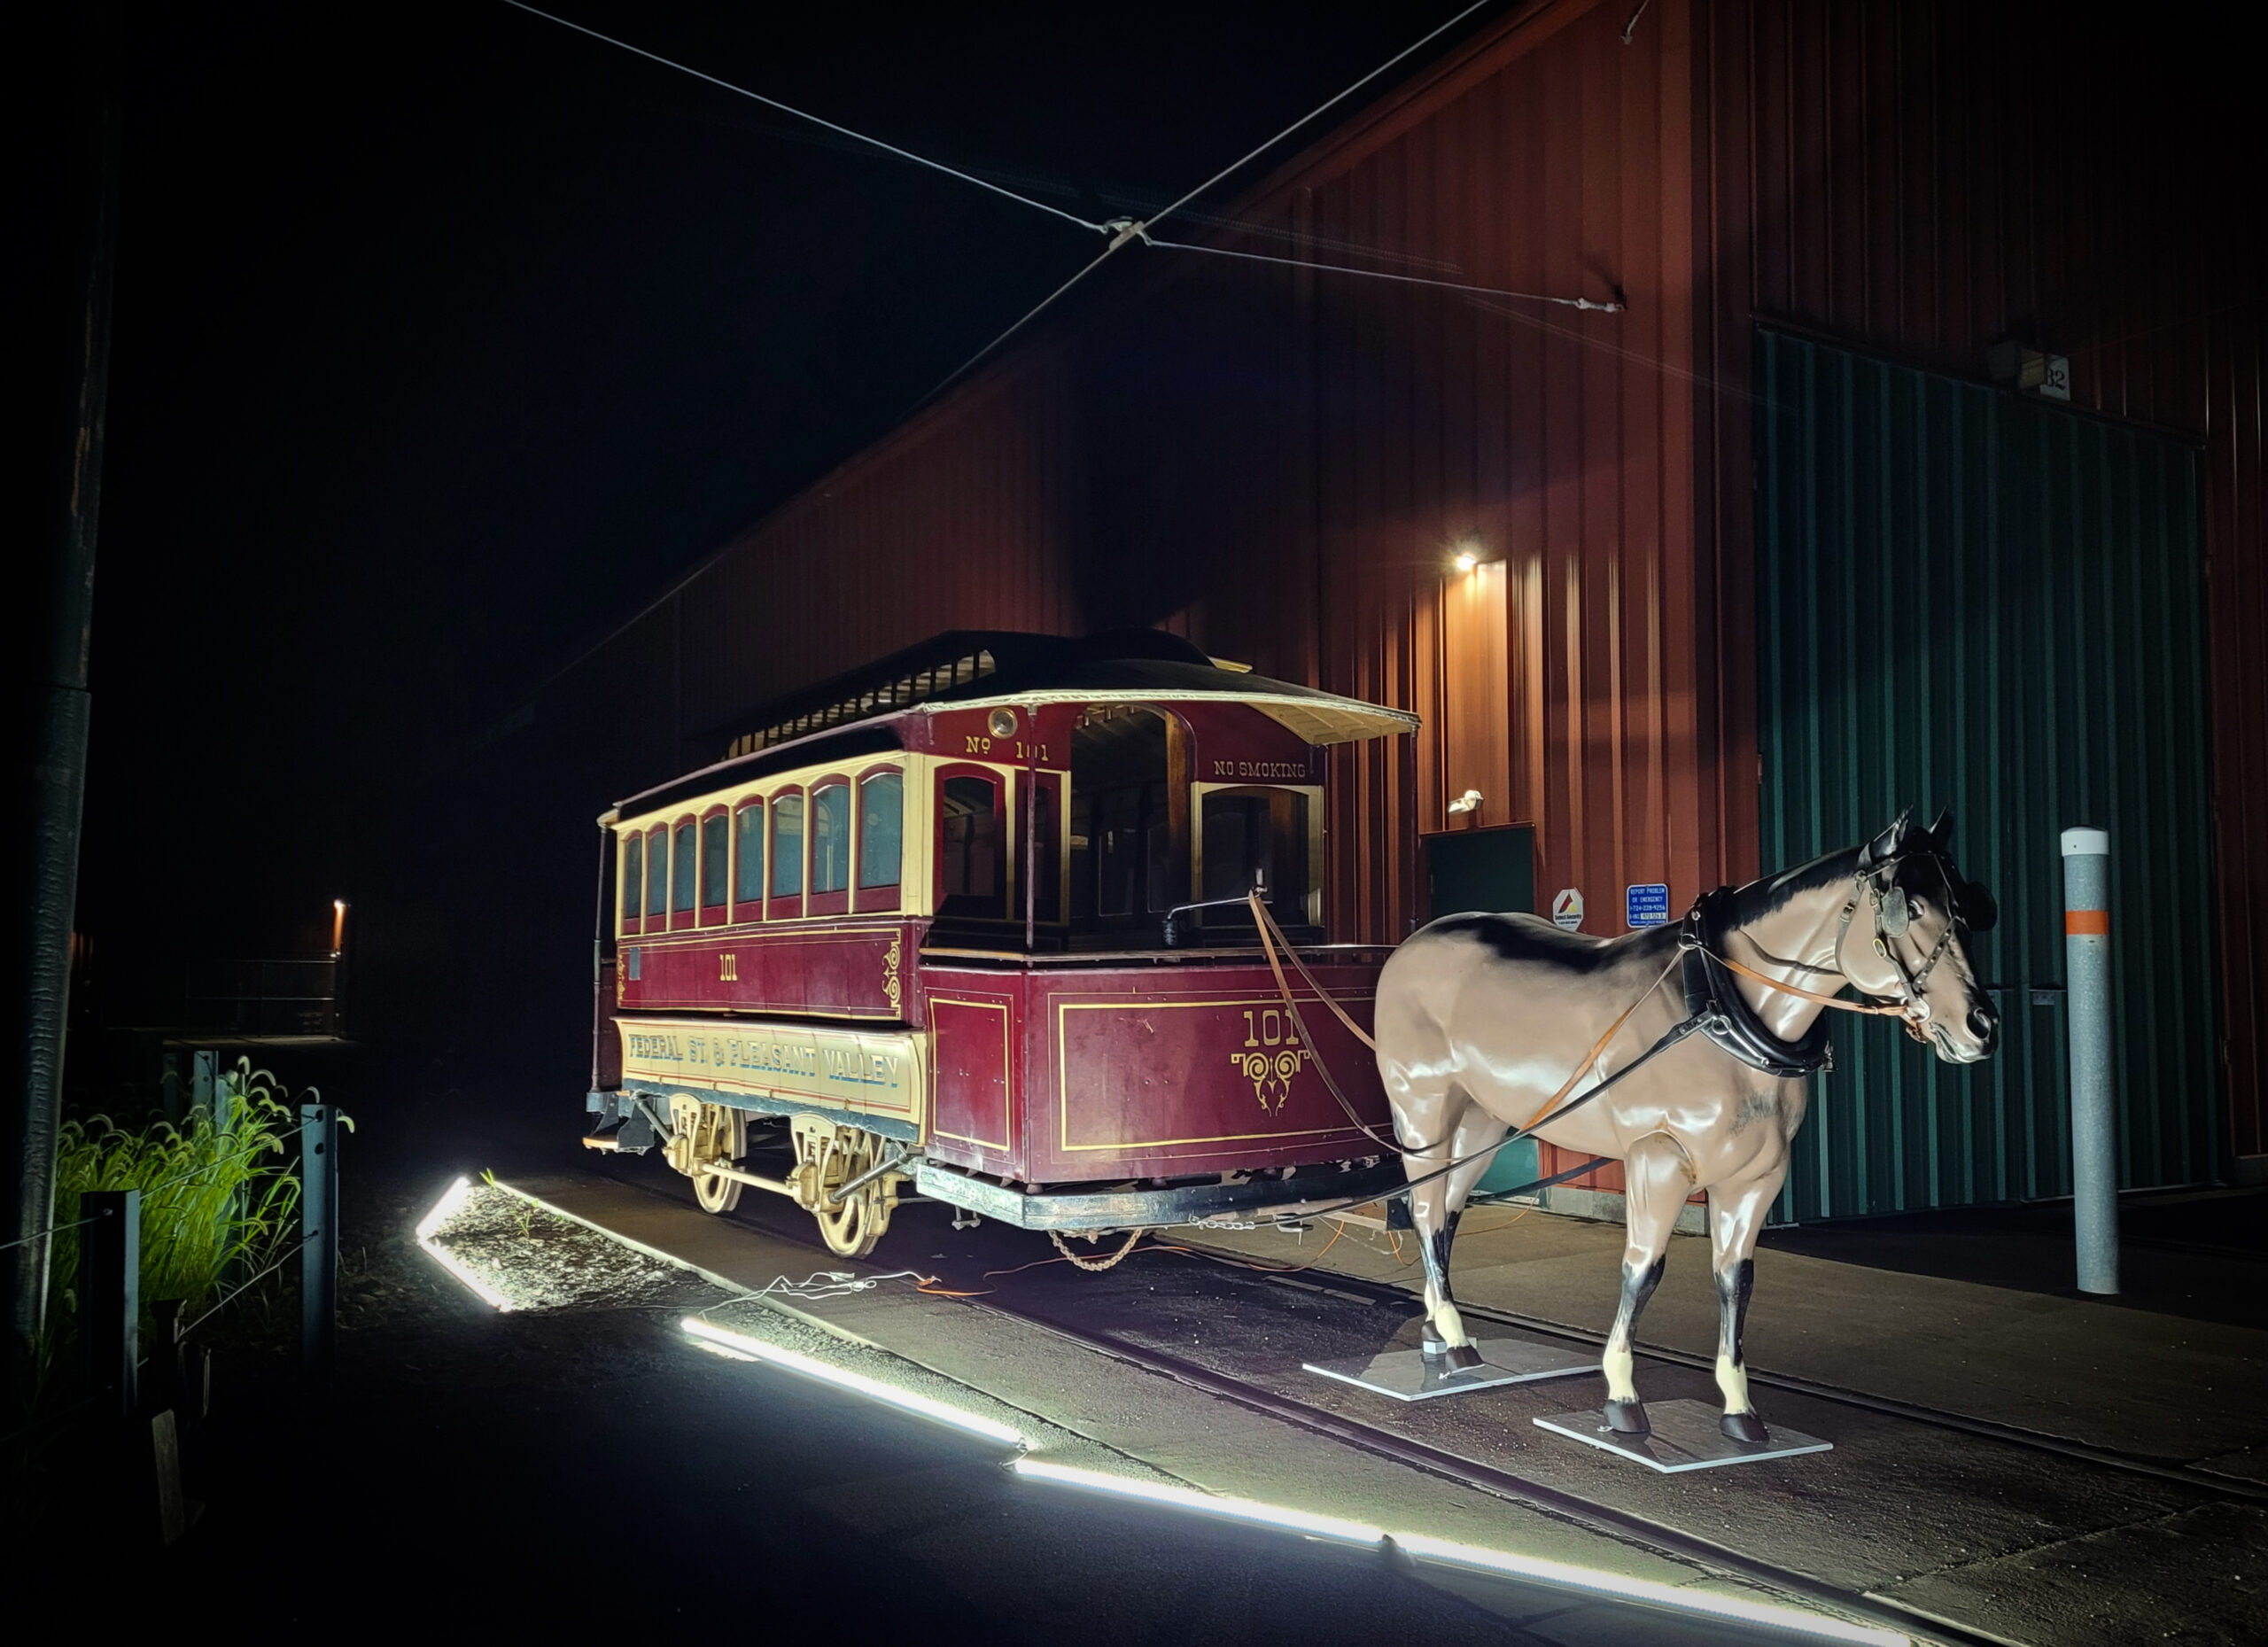 The Horse Spotlighted At Night